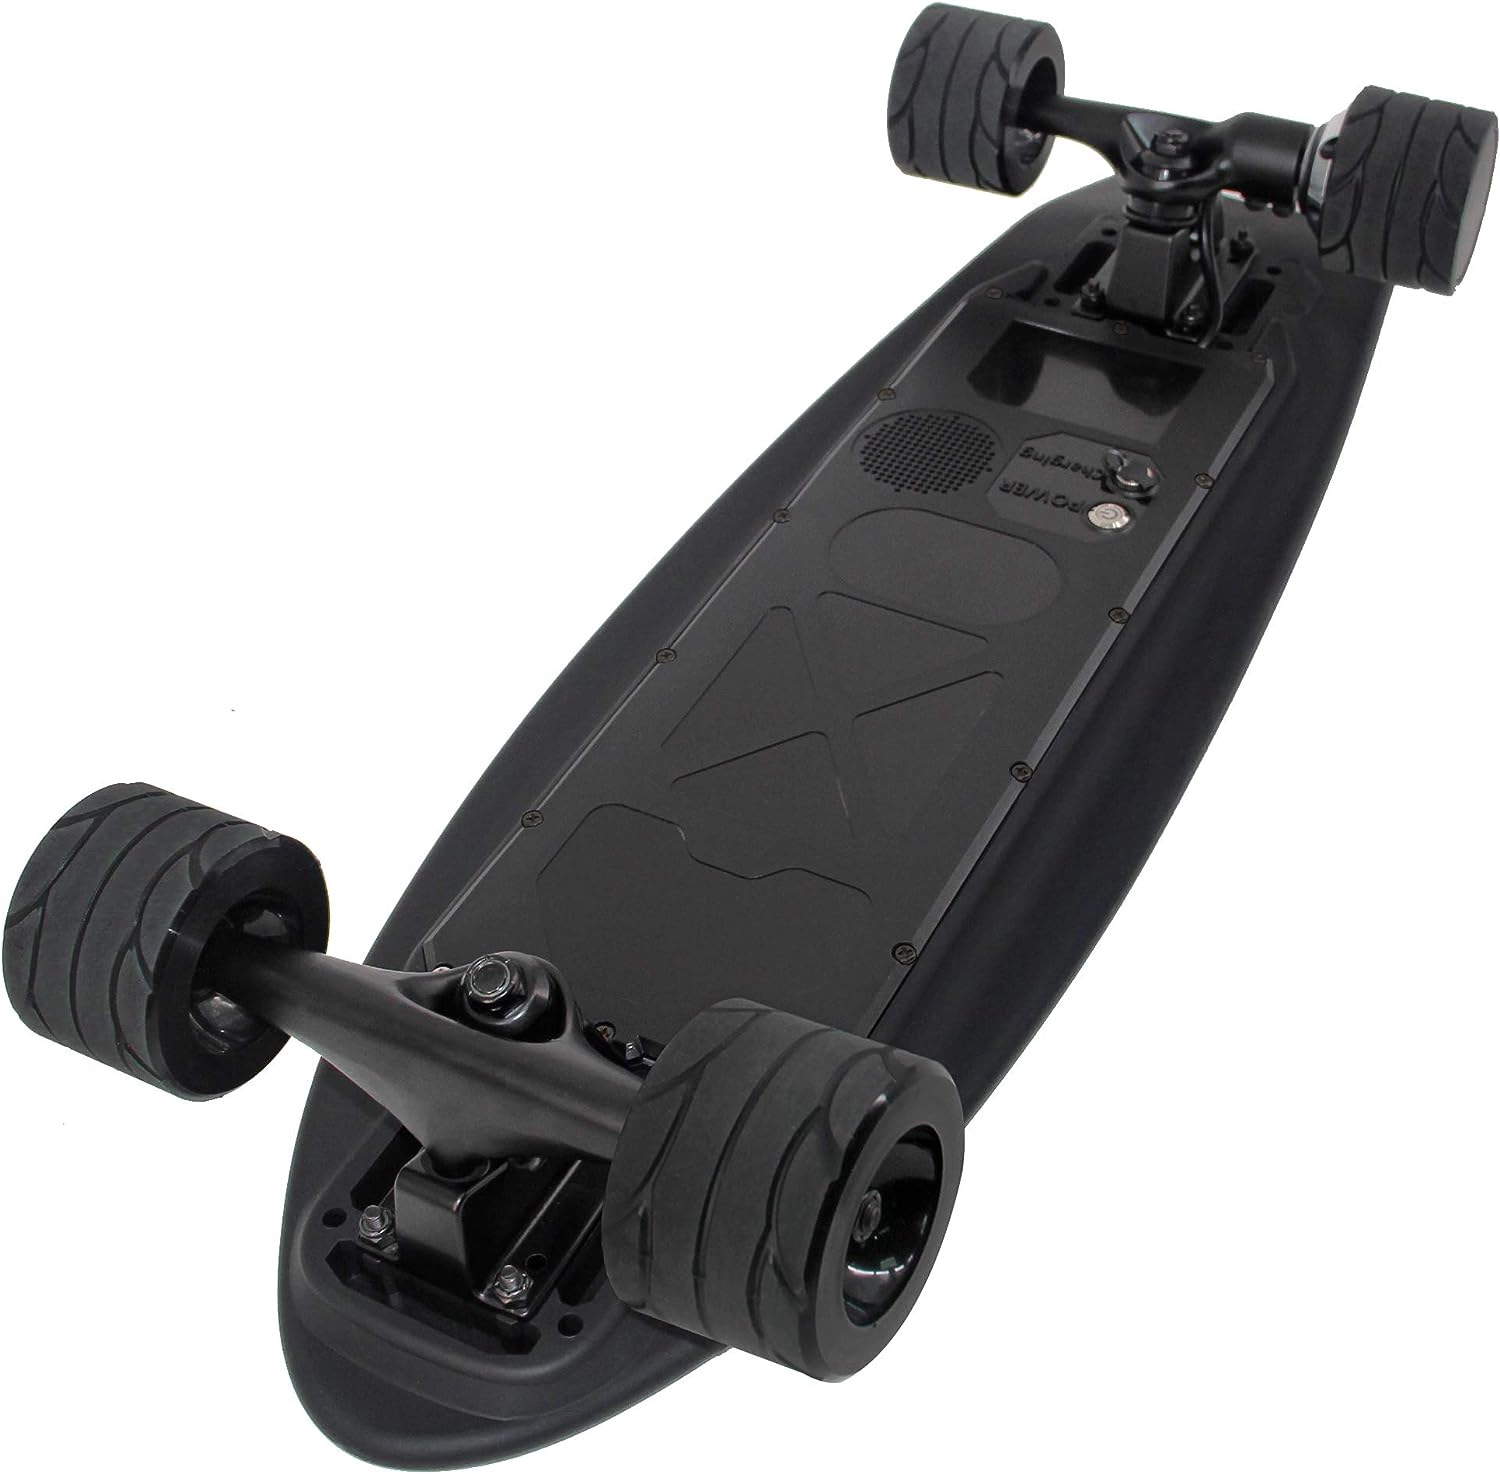 OLELy Electric Skateboard - Unleash Your Adventurous Spirit with this Slow Down Fish Board